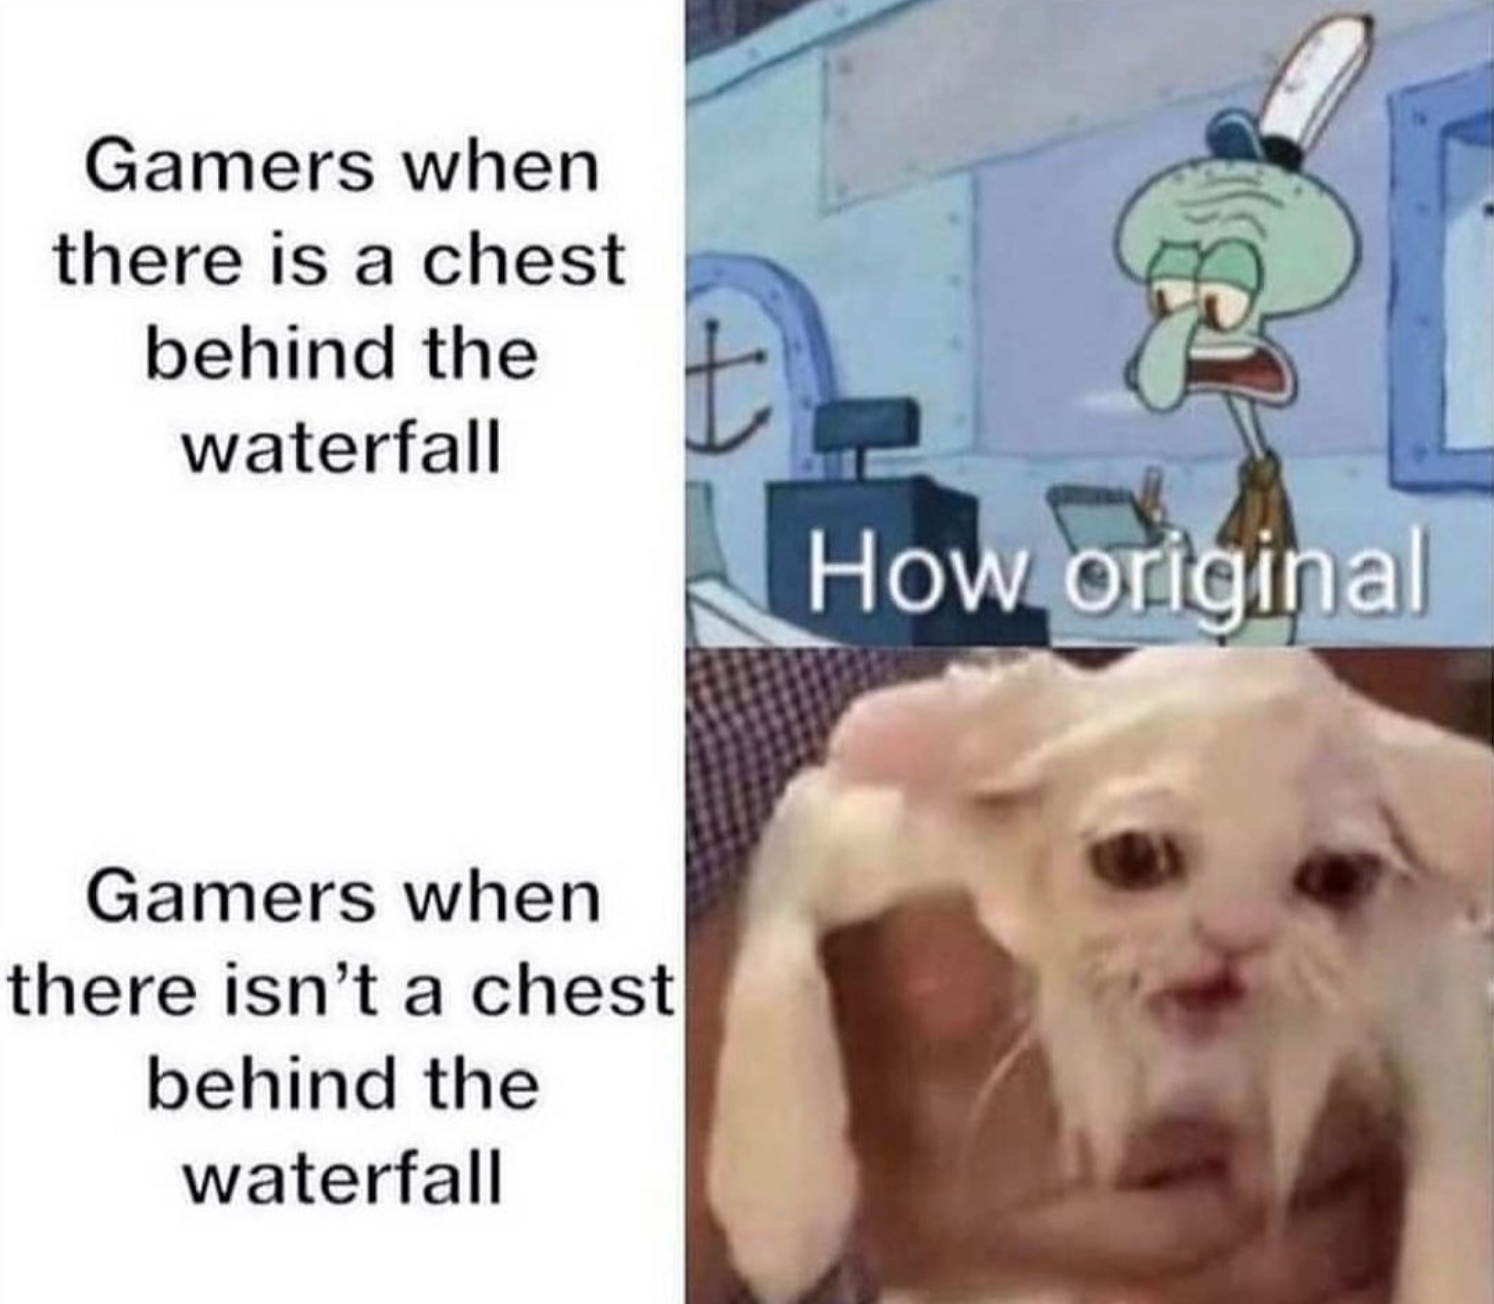 funny gaming memes - gamers when there's a chest behind a waterfall - Gamers when there is a chest behind the waterfall t How original Gamers when there isn't a chest behind the waterfall